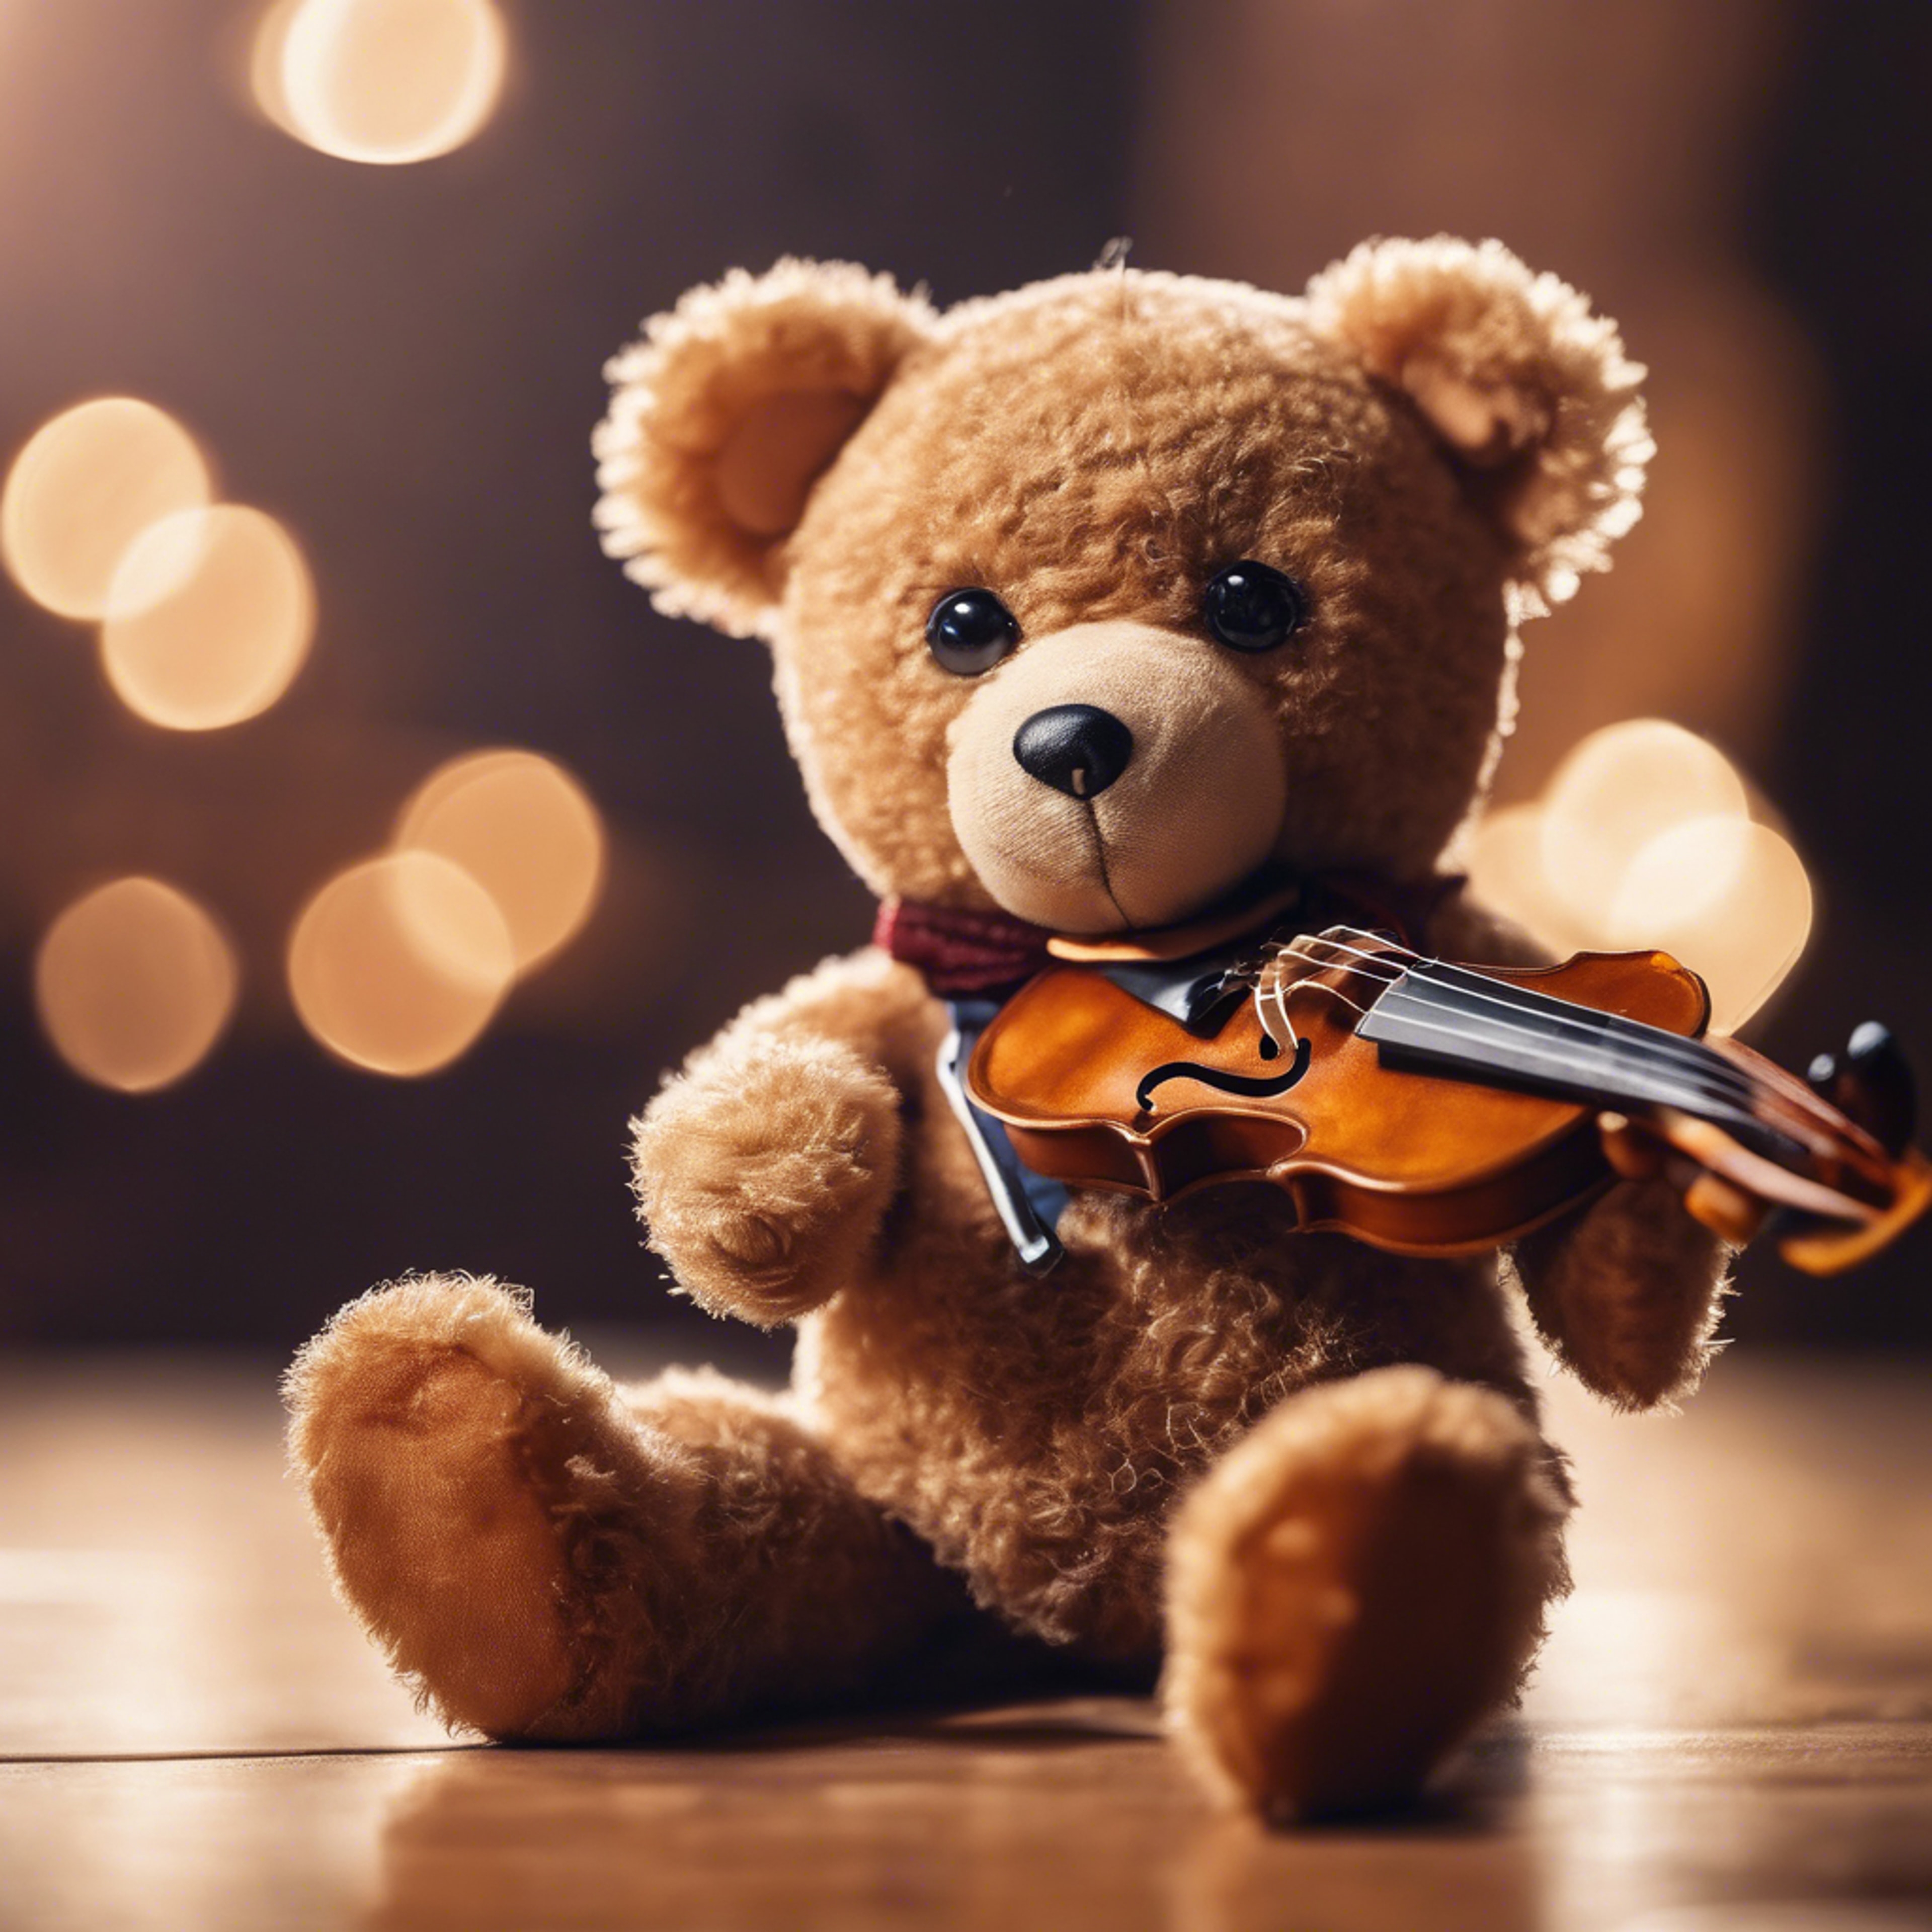 A teddy bear performing on stage with a tiny violin.壁紙[76ad05df74b048fa835e]